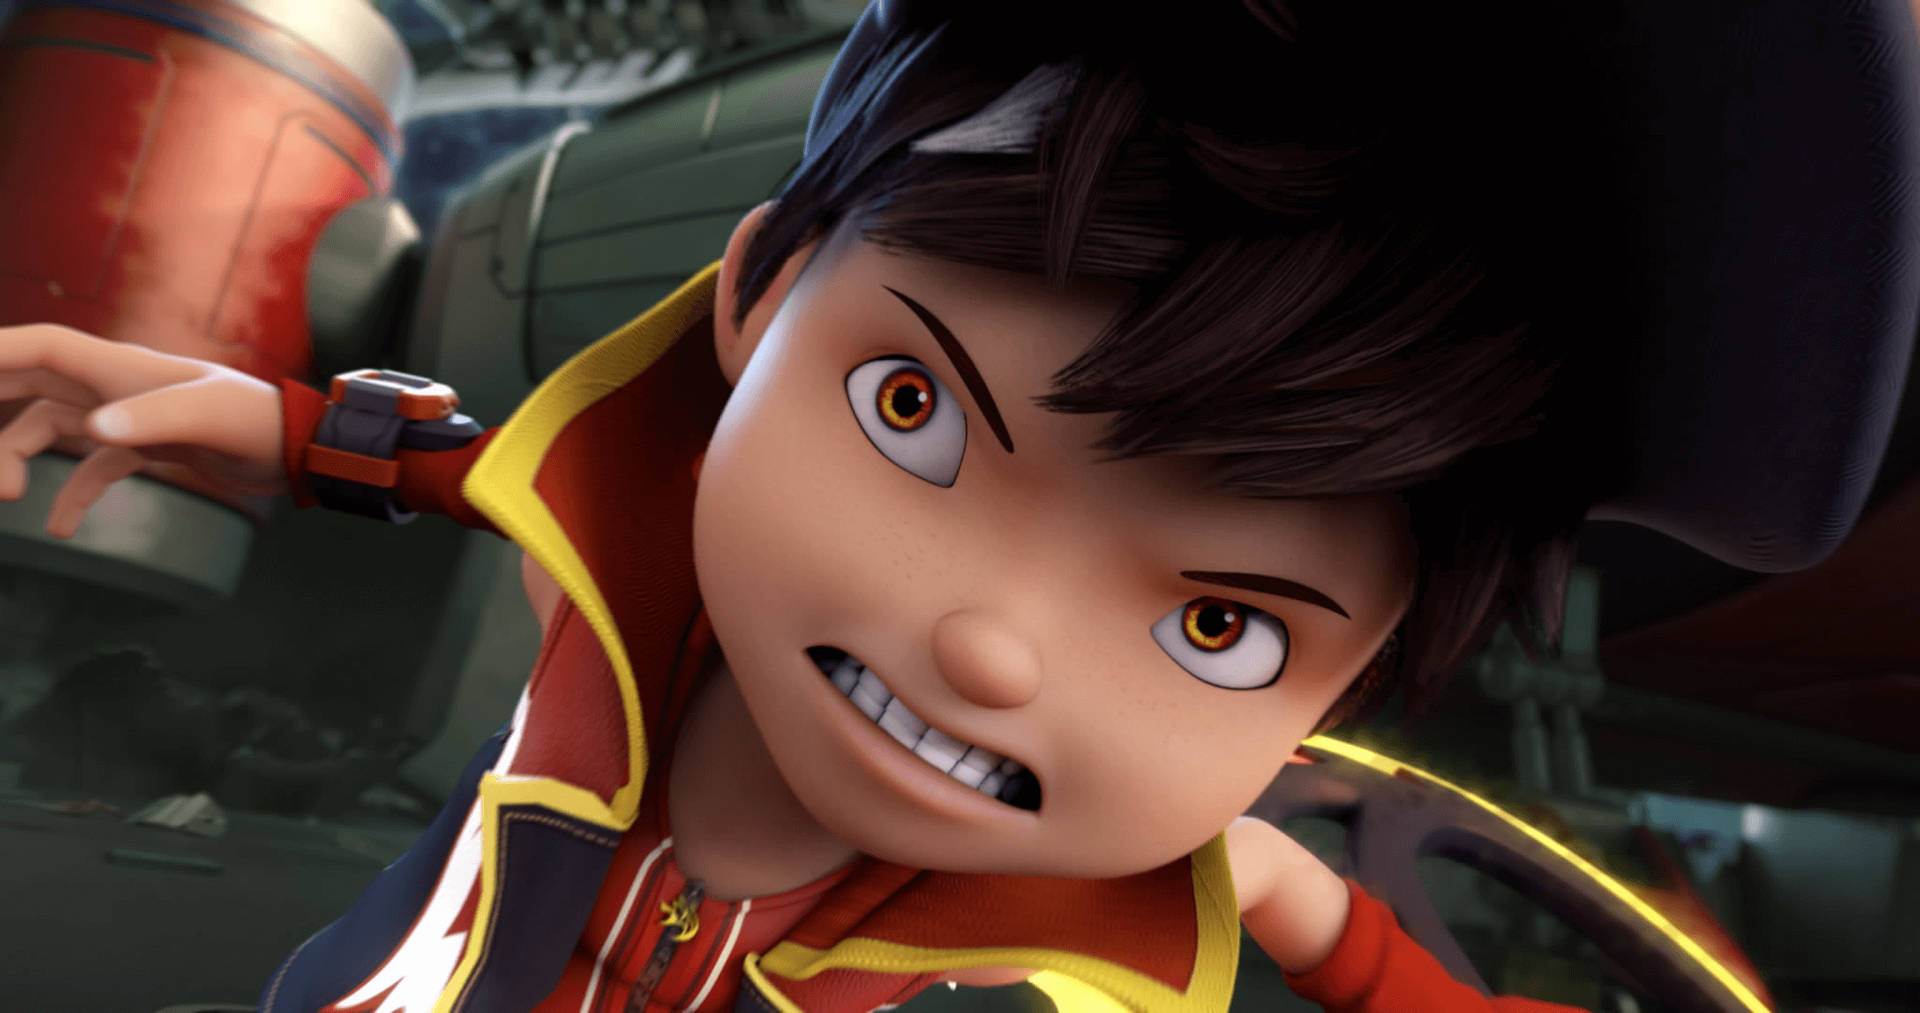 Exciting Adventures Await in Boboiboy HD Galaxy Form Wallpaper